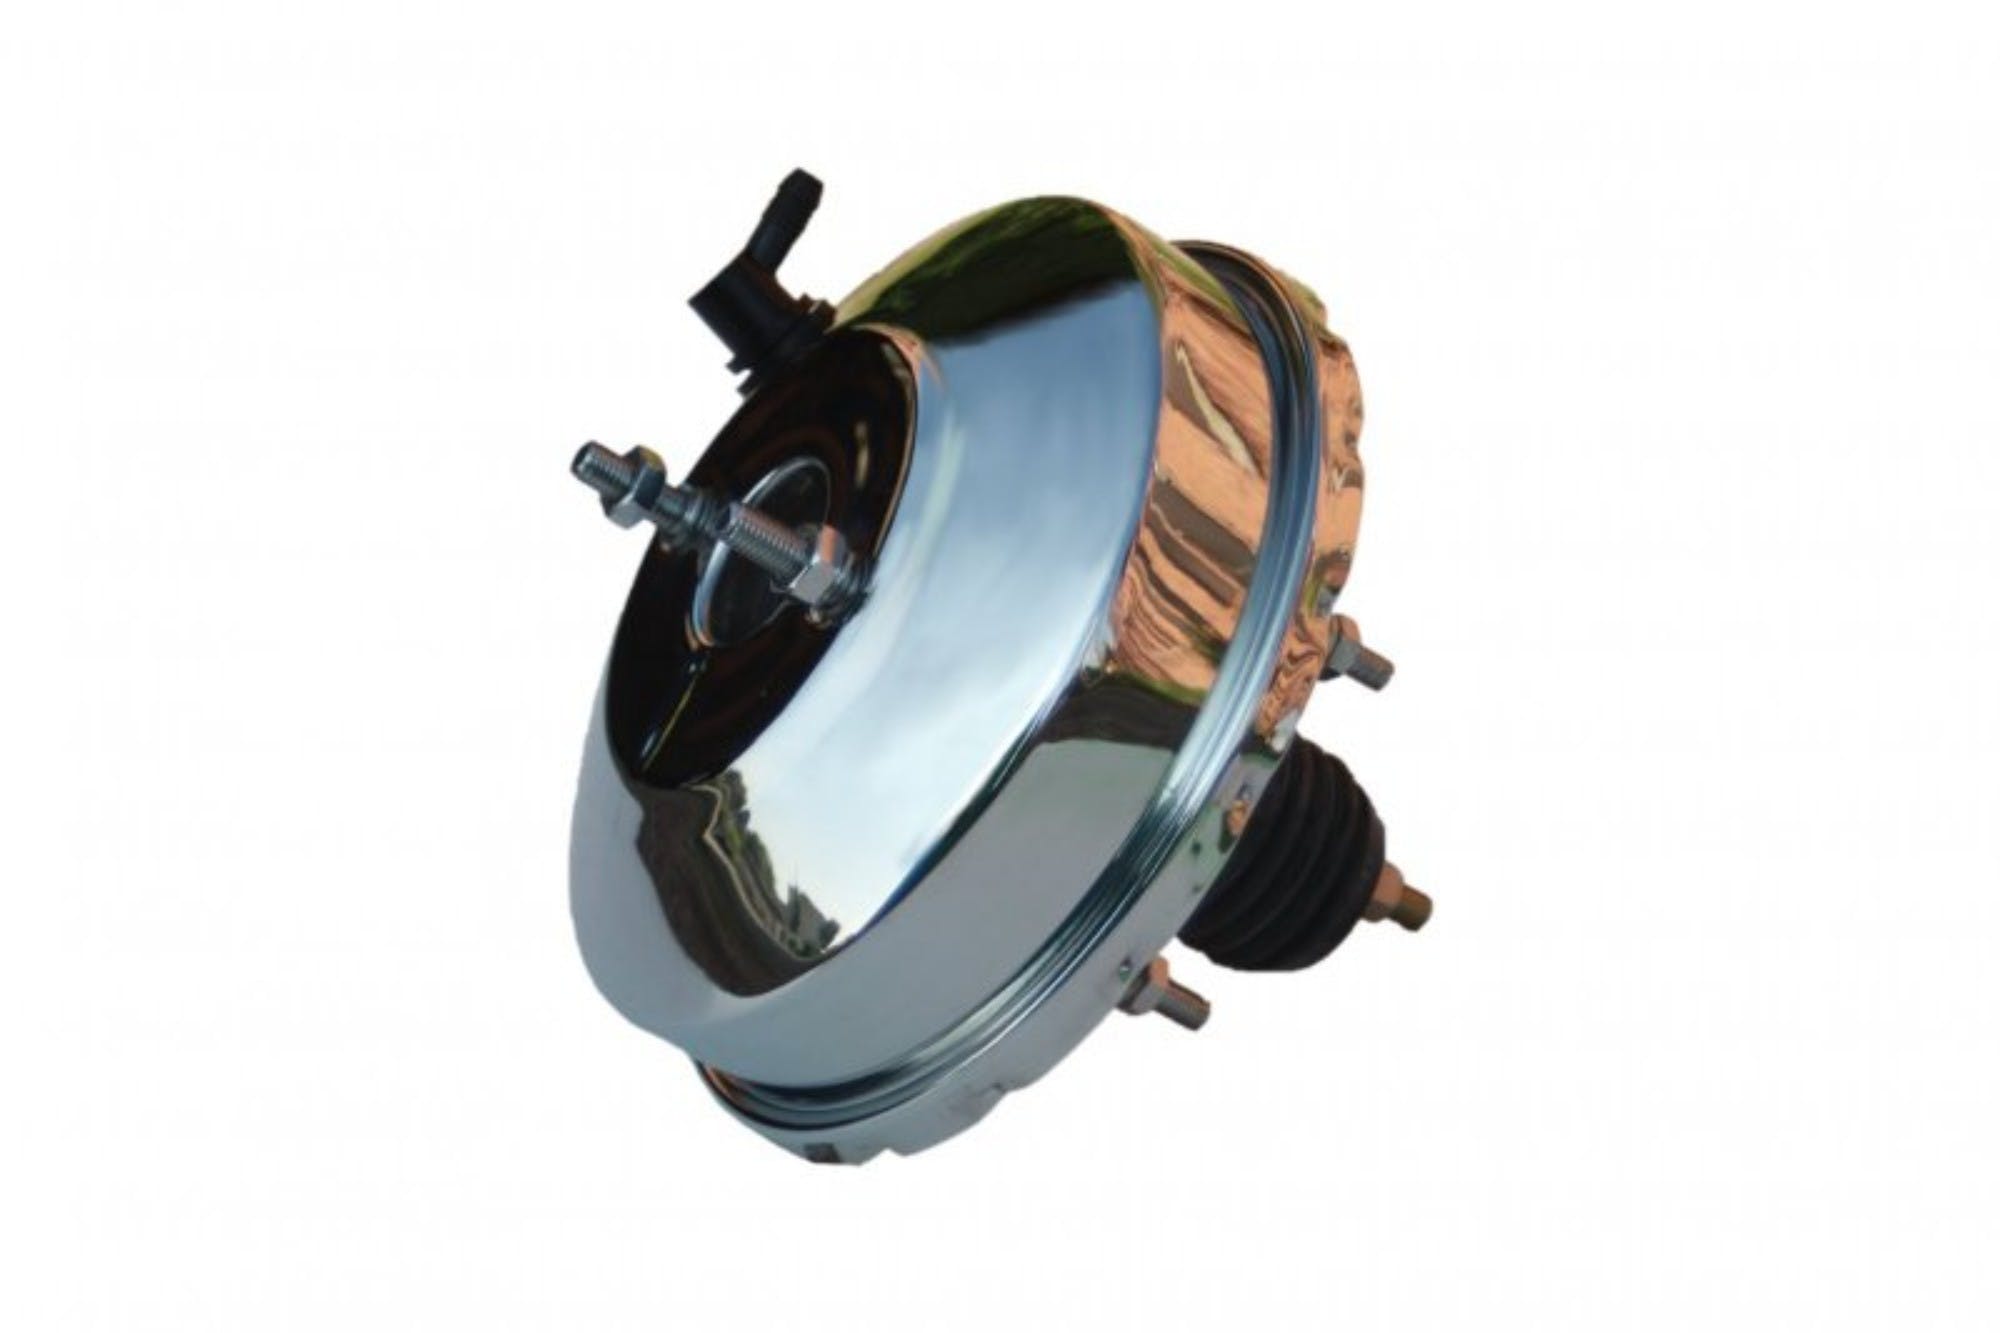 LEED Brakes PB02 9 in Booster (Chrome)